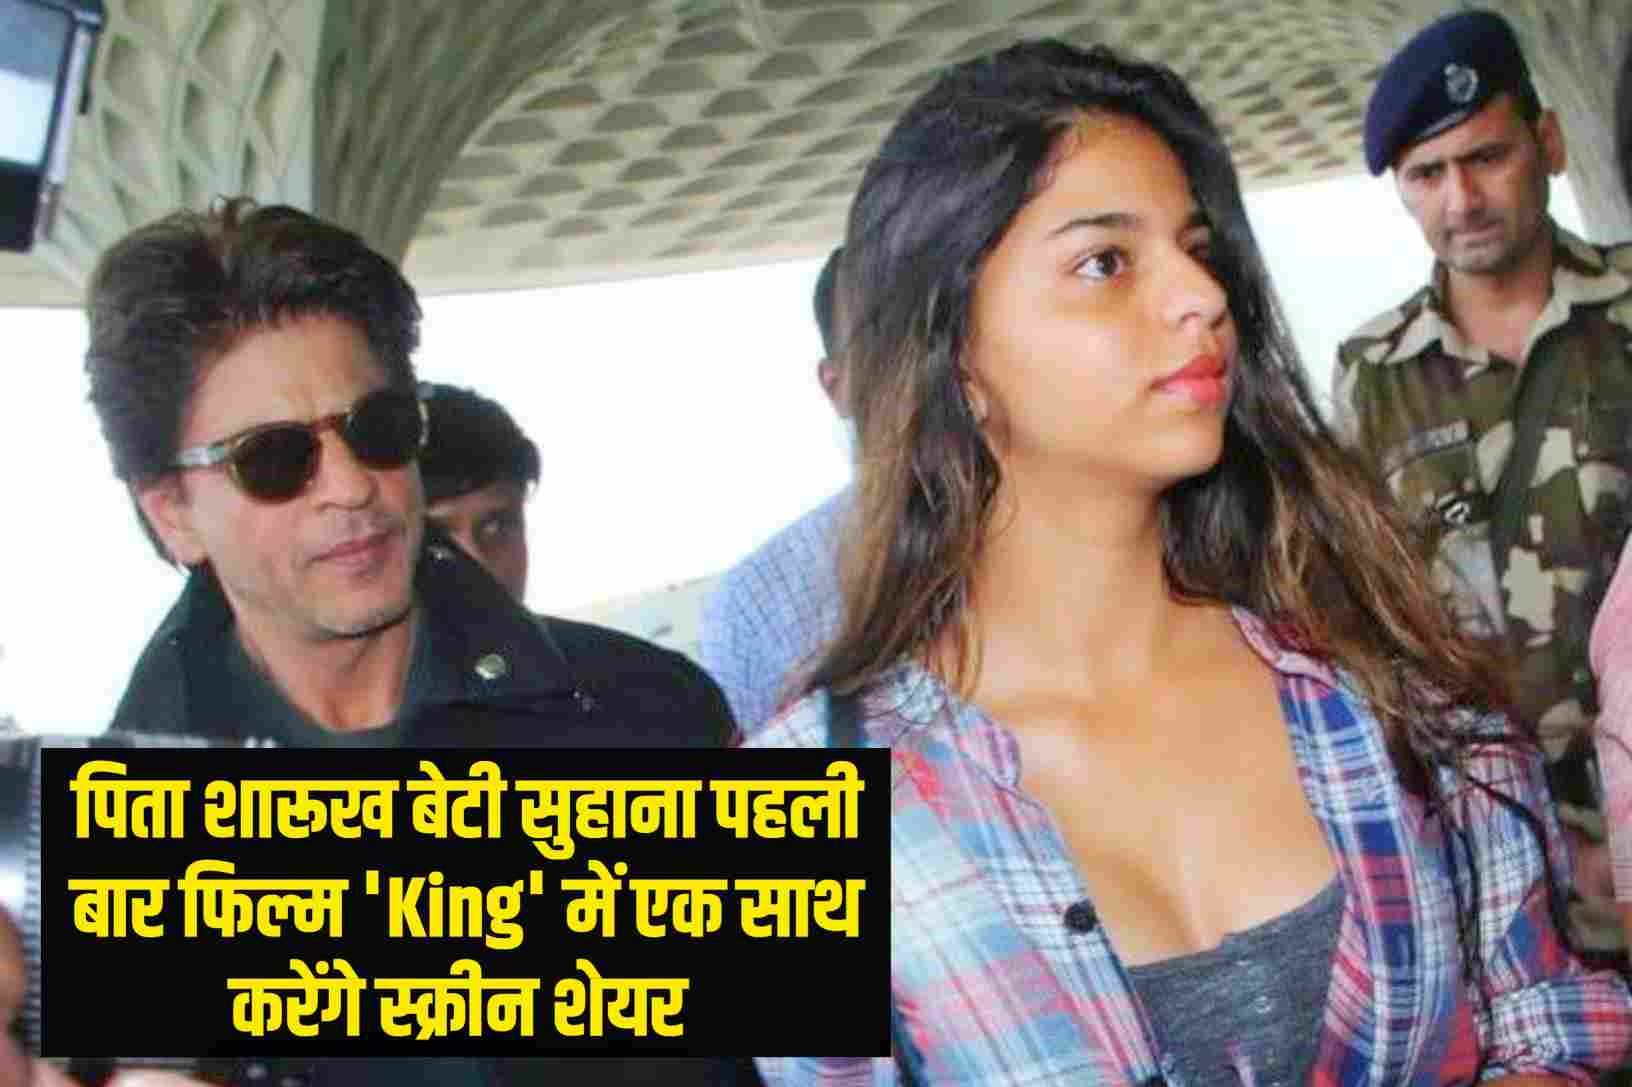 Entertainment/bollywood news/Big update on Shahrukh Khan's new film 'King', secret preparations started with Suhana Khan!